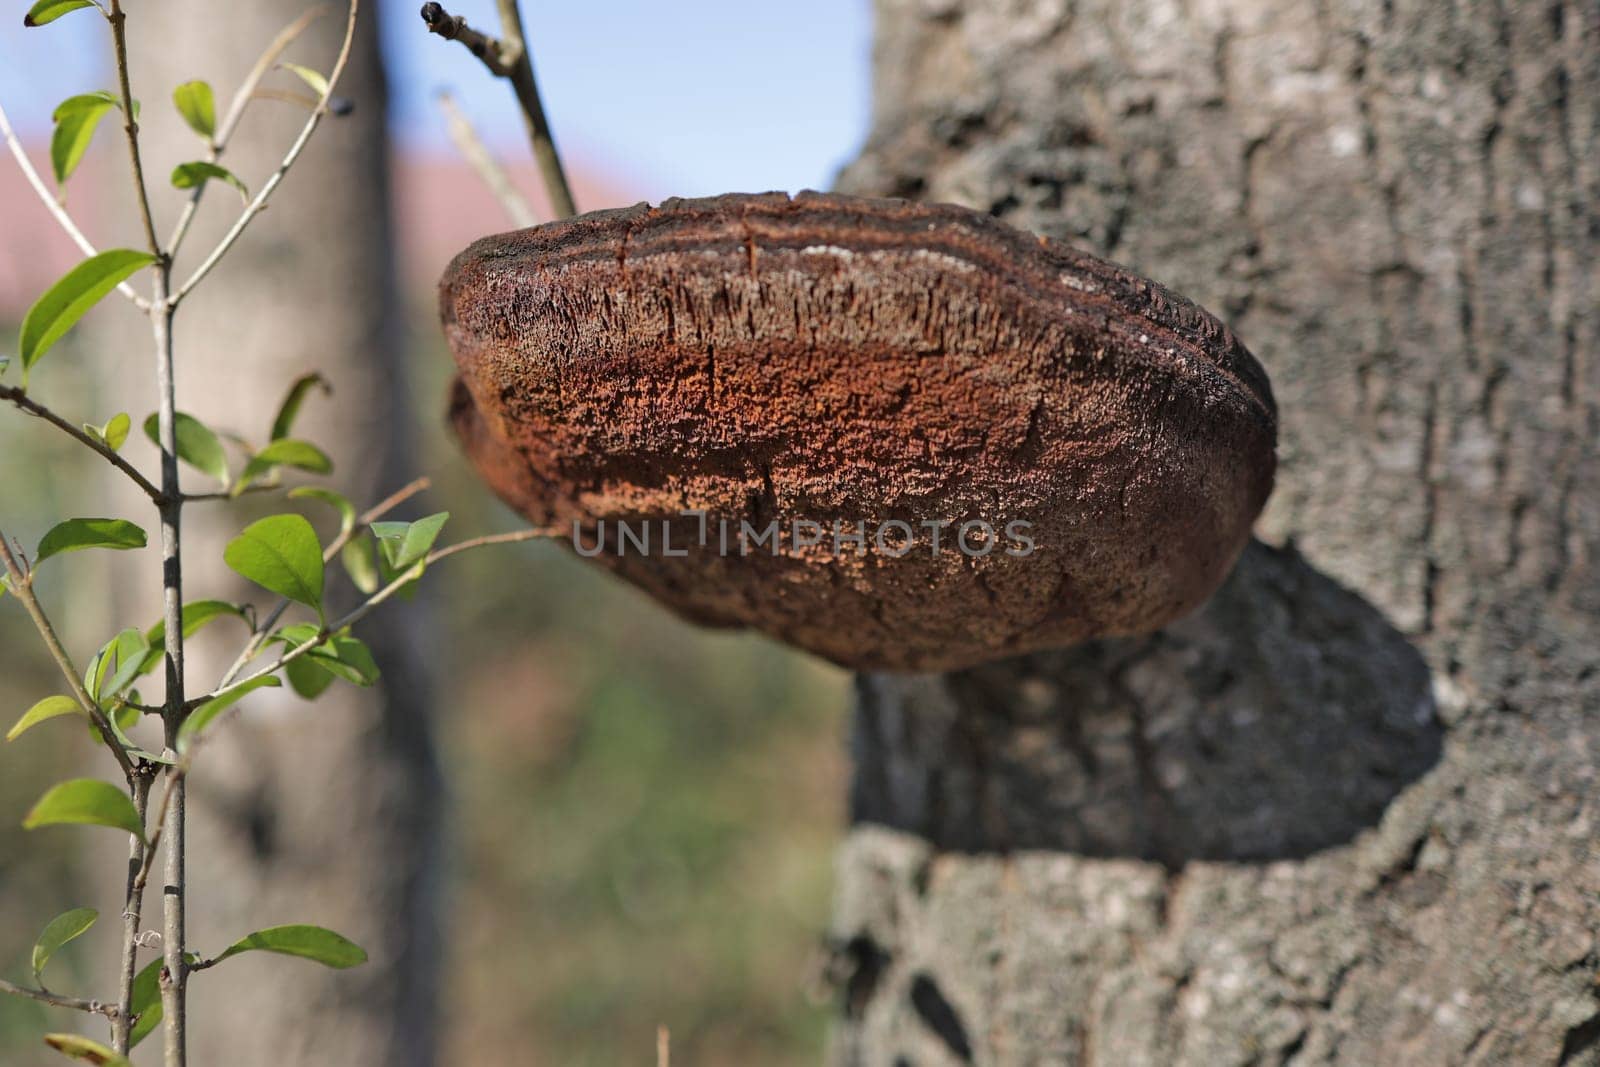 Tinder fungus on aspen trunk. Fomes fomentarius. Fungus is a parasite growing on a tree. false tinder fungus on a tree trunk. photo with shallow depth of field